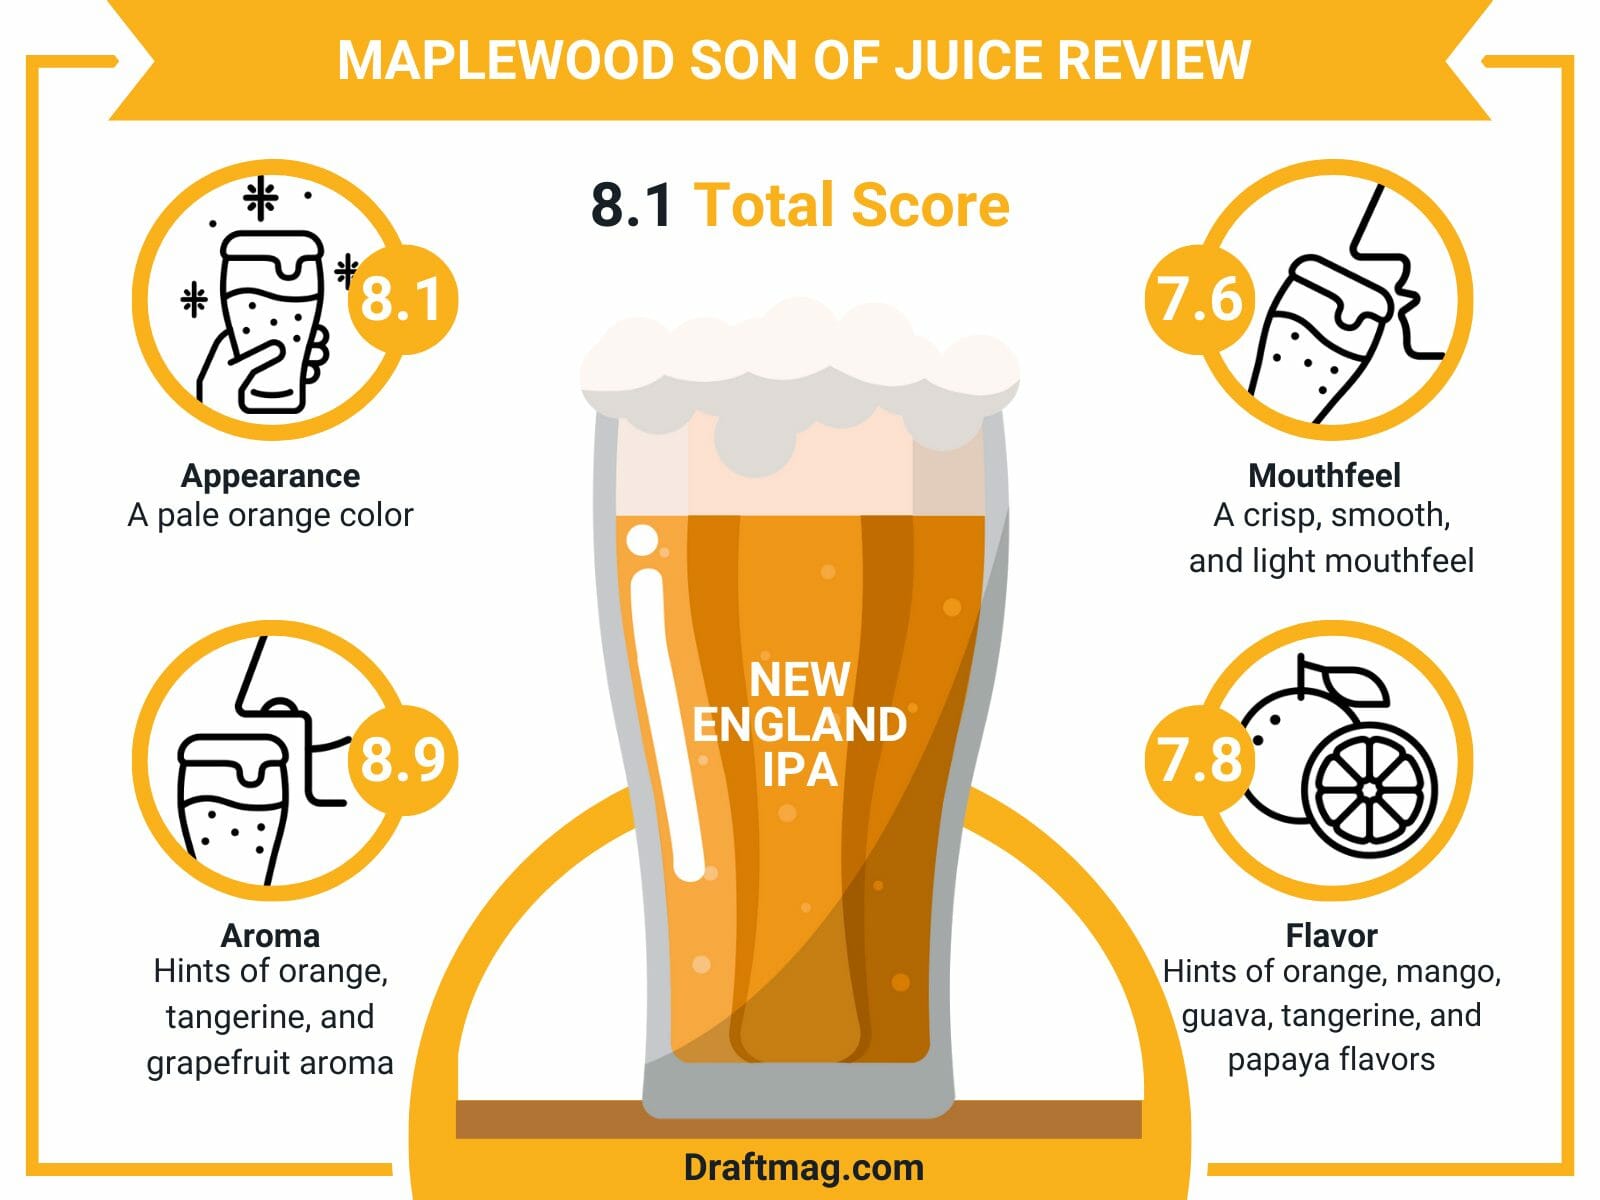 Maplewood son of juice review infographic